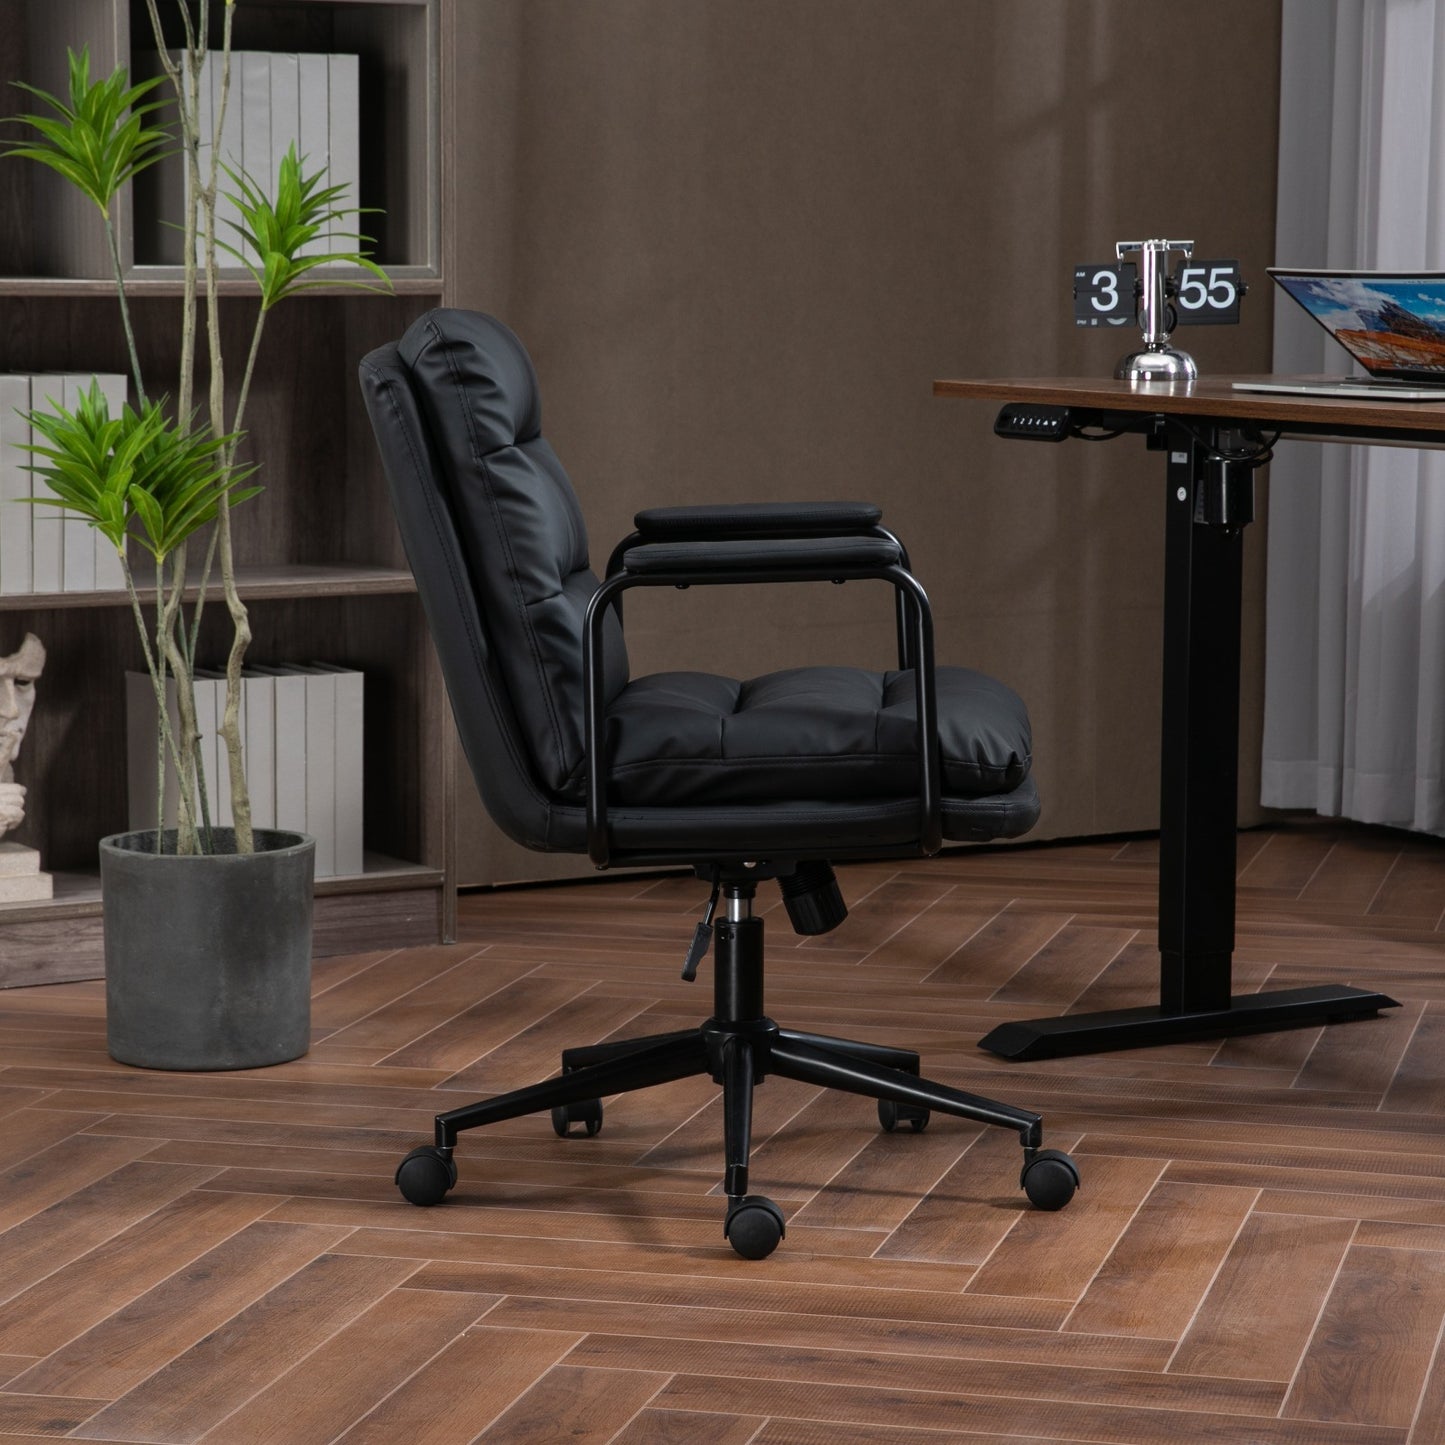 Office Chair,Mid Back Home Office Desk Task Chair with Wheels and Arms Ergonomic PU Leather Computer Rolling Swivel Chair with Padded Armrest,The back of the chair can recline 40° (Black)